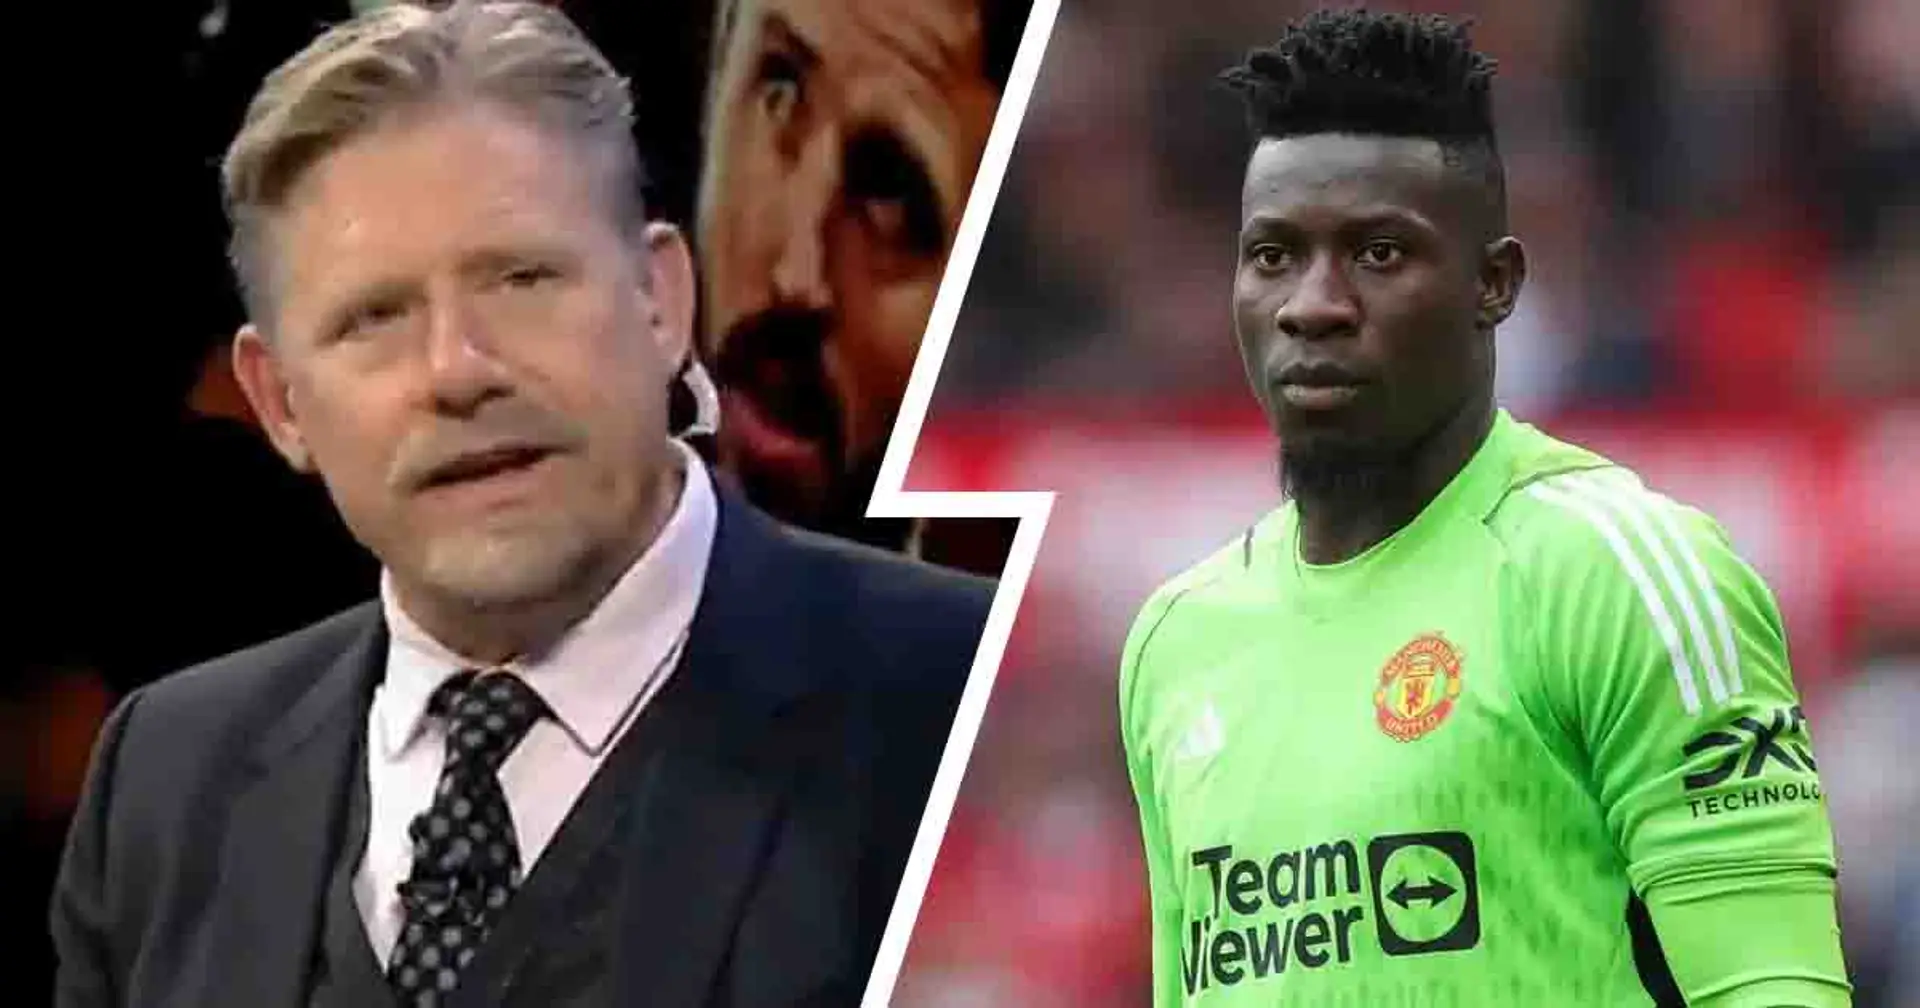 'I have no idea how he'll handle that': Schmeichel issues warning to Onana about life at Man United